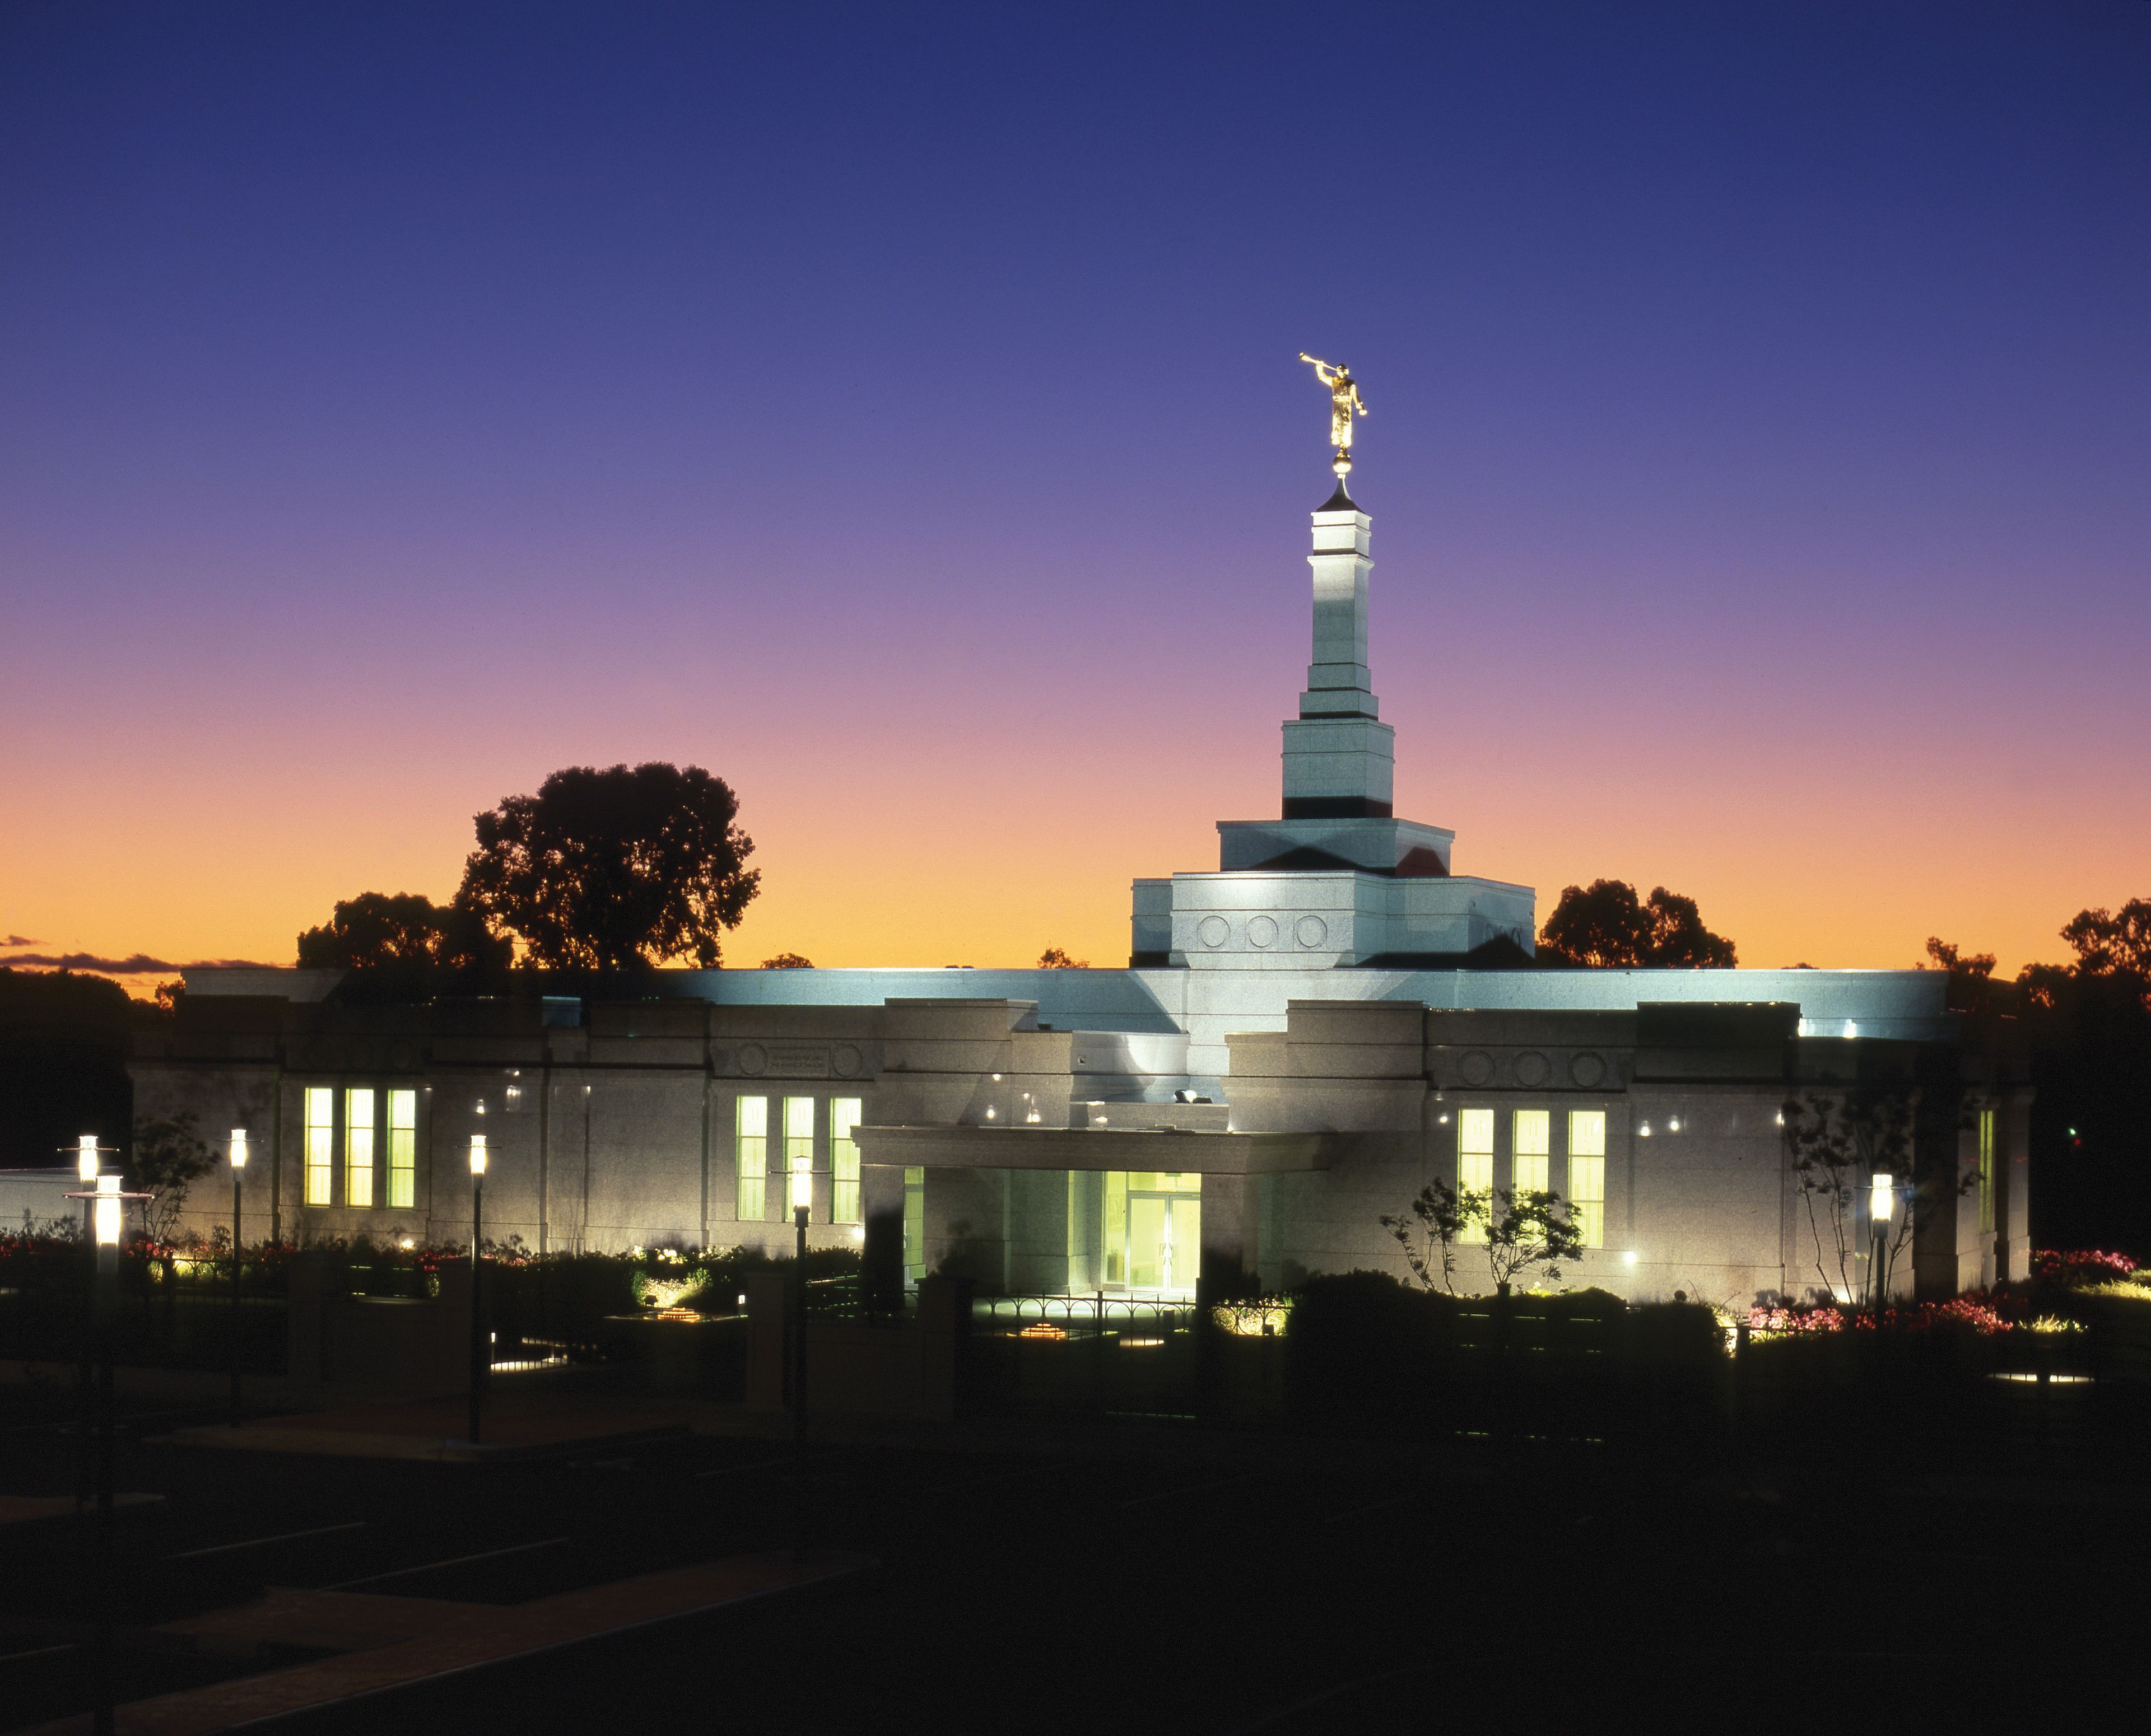 The exterior of the Adelaide Australia Temple is lit up at night.